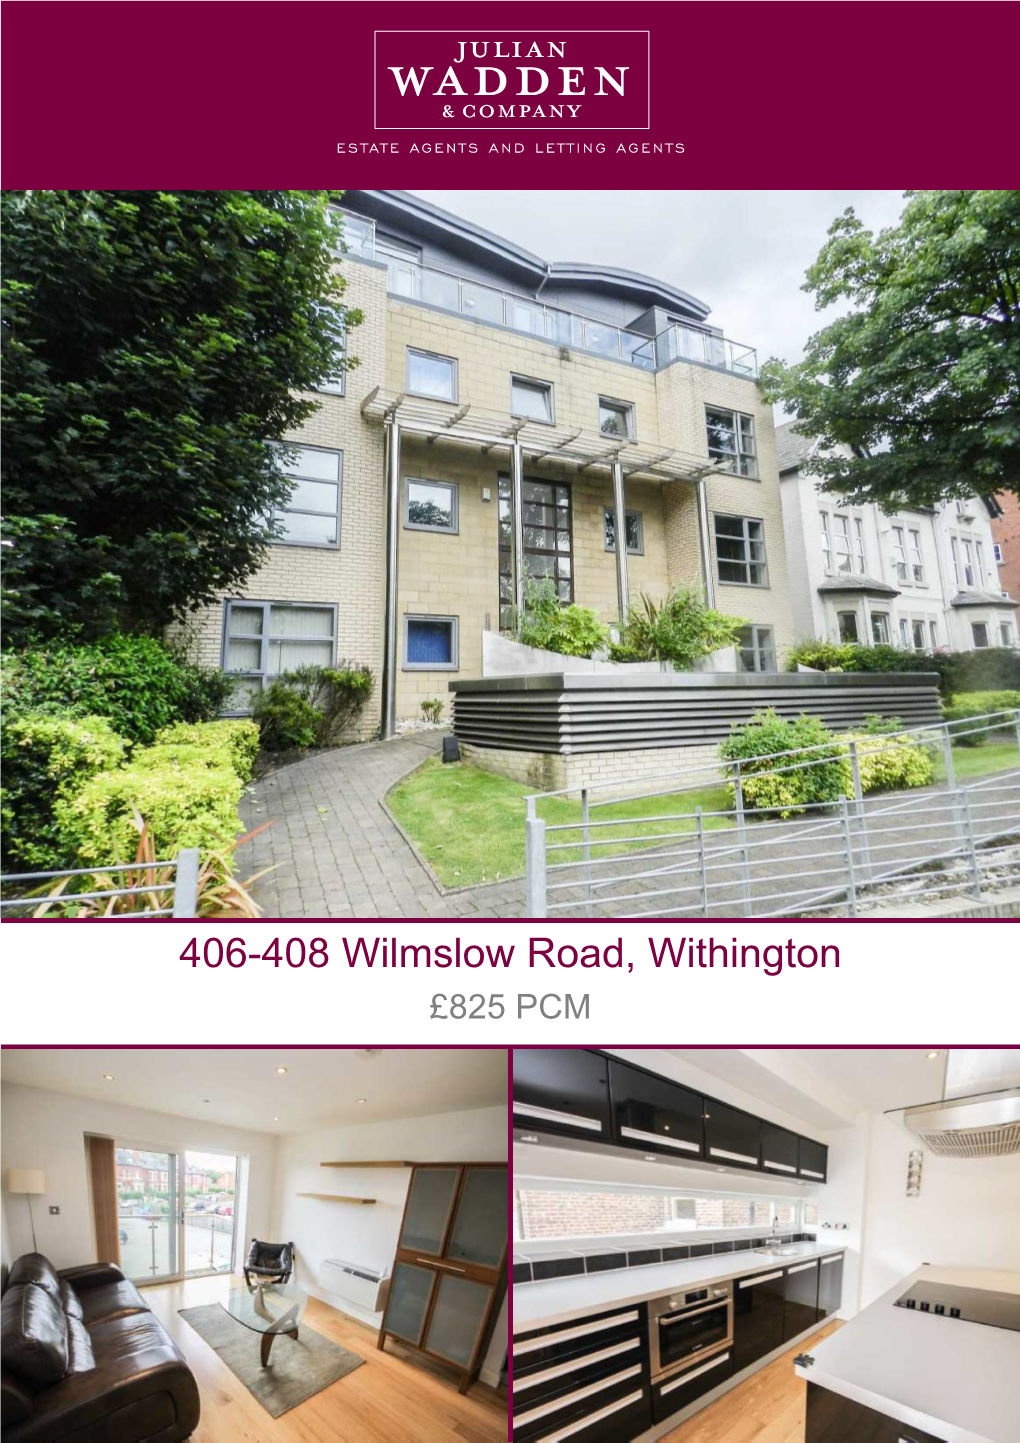 406-408 Wilmslow Road, Withington £825 PCM 406-408 Wilmslow Road | Withington